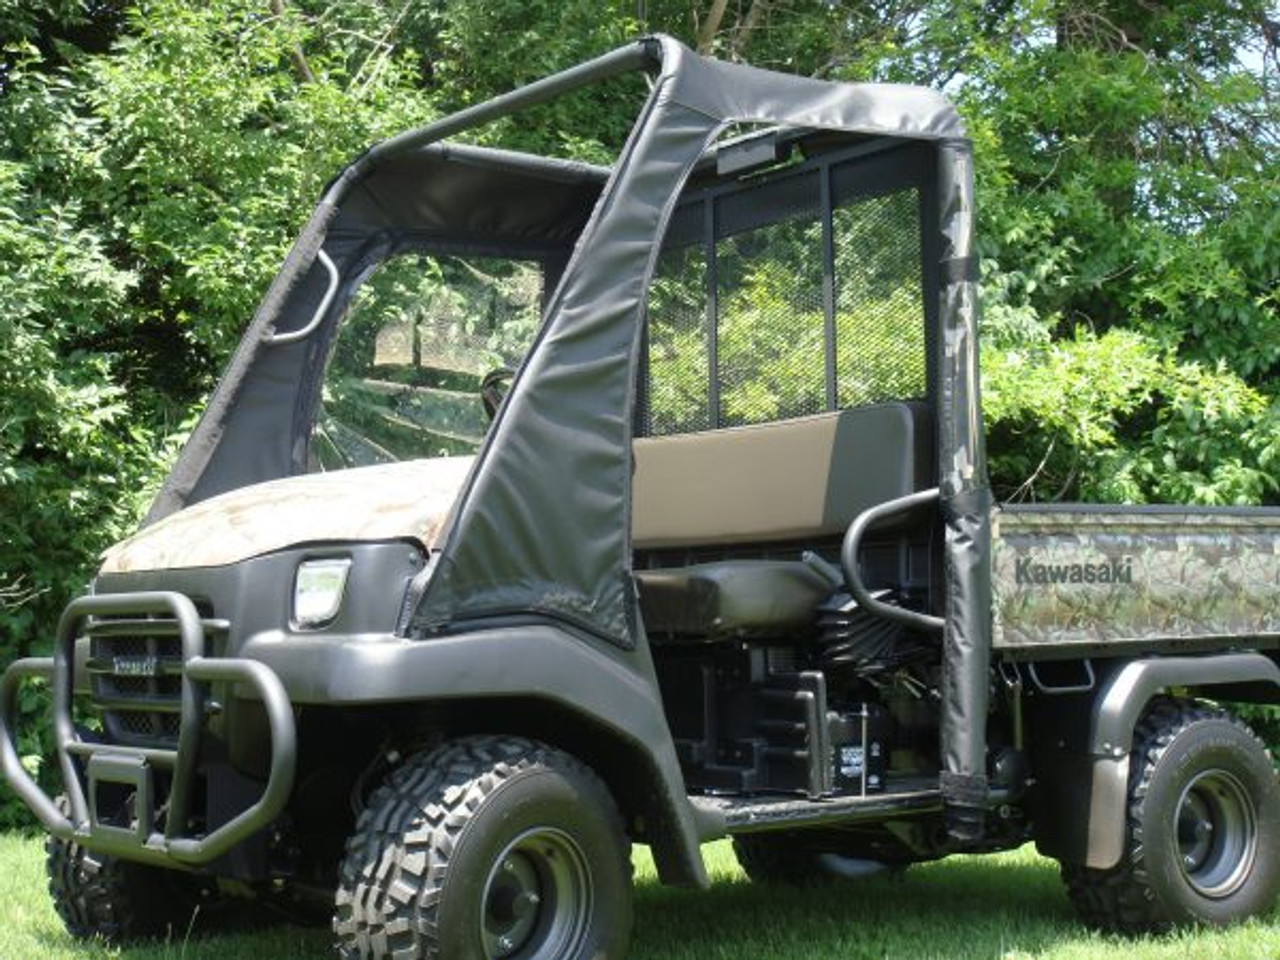 3 Star side x side Kawasaki Mule 3000/3010 cab enclosure front and side angle view